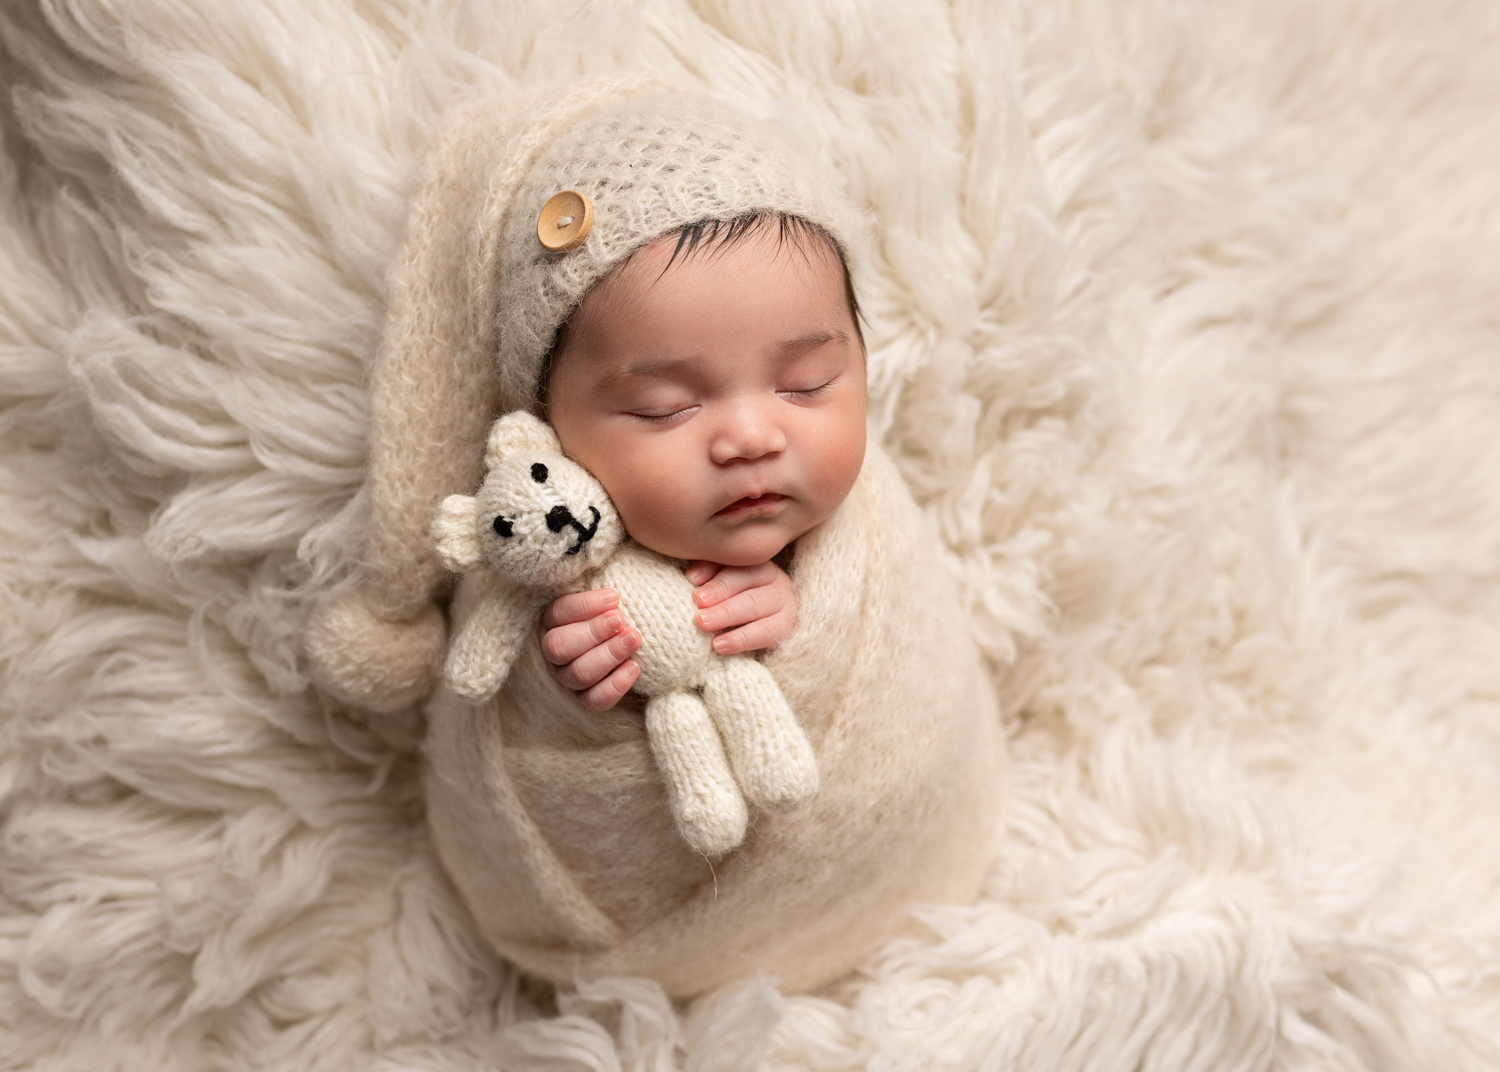 newborn baby girl wrapped up in cream wrap, cuddling a teddy on a white fluffy rug. Photographed during a newborn photoshoot in Kent